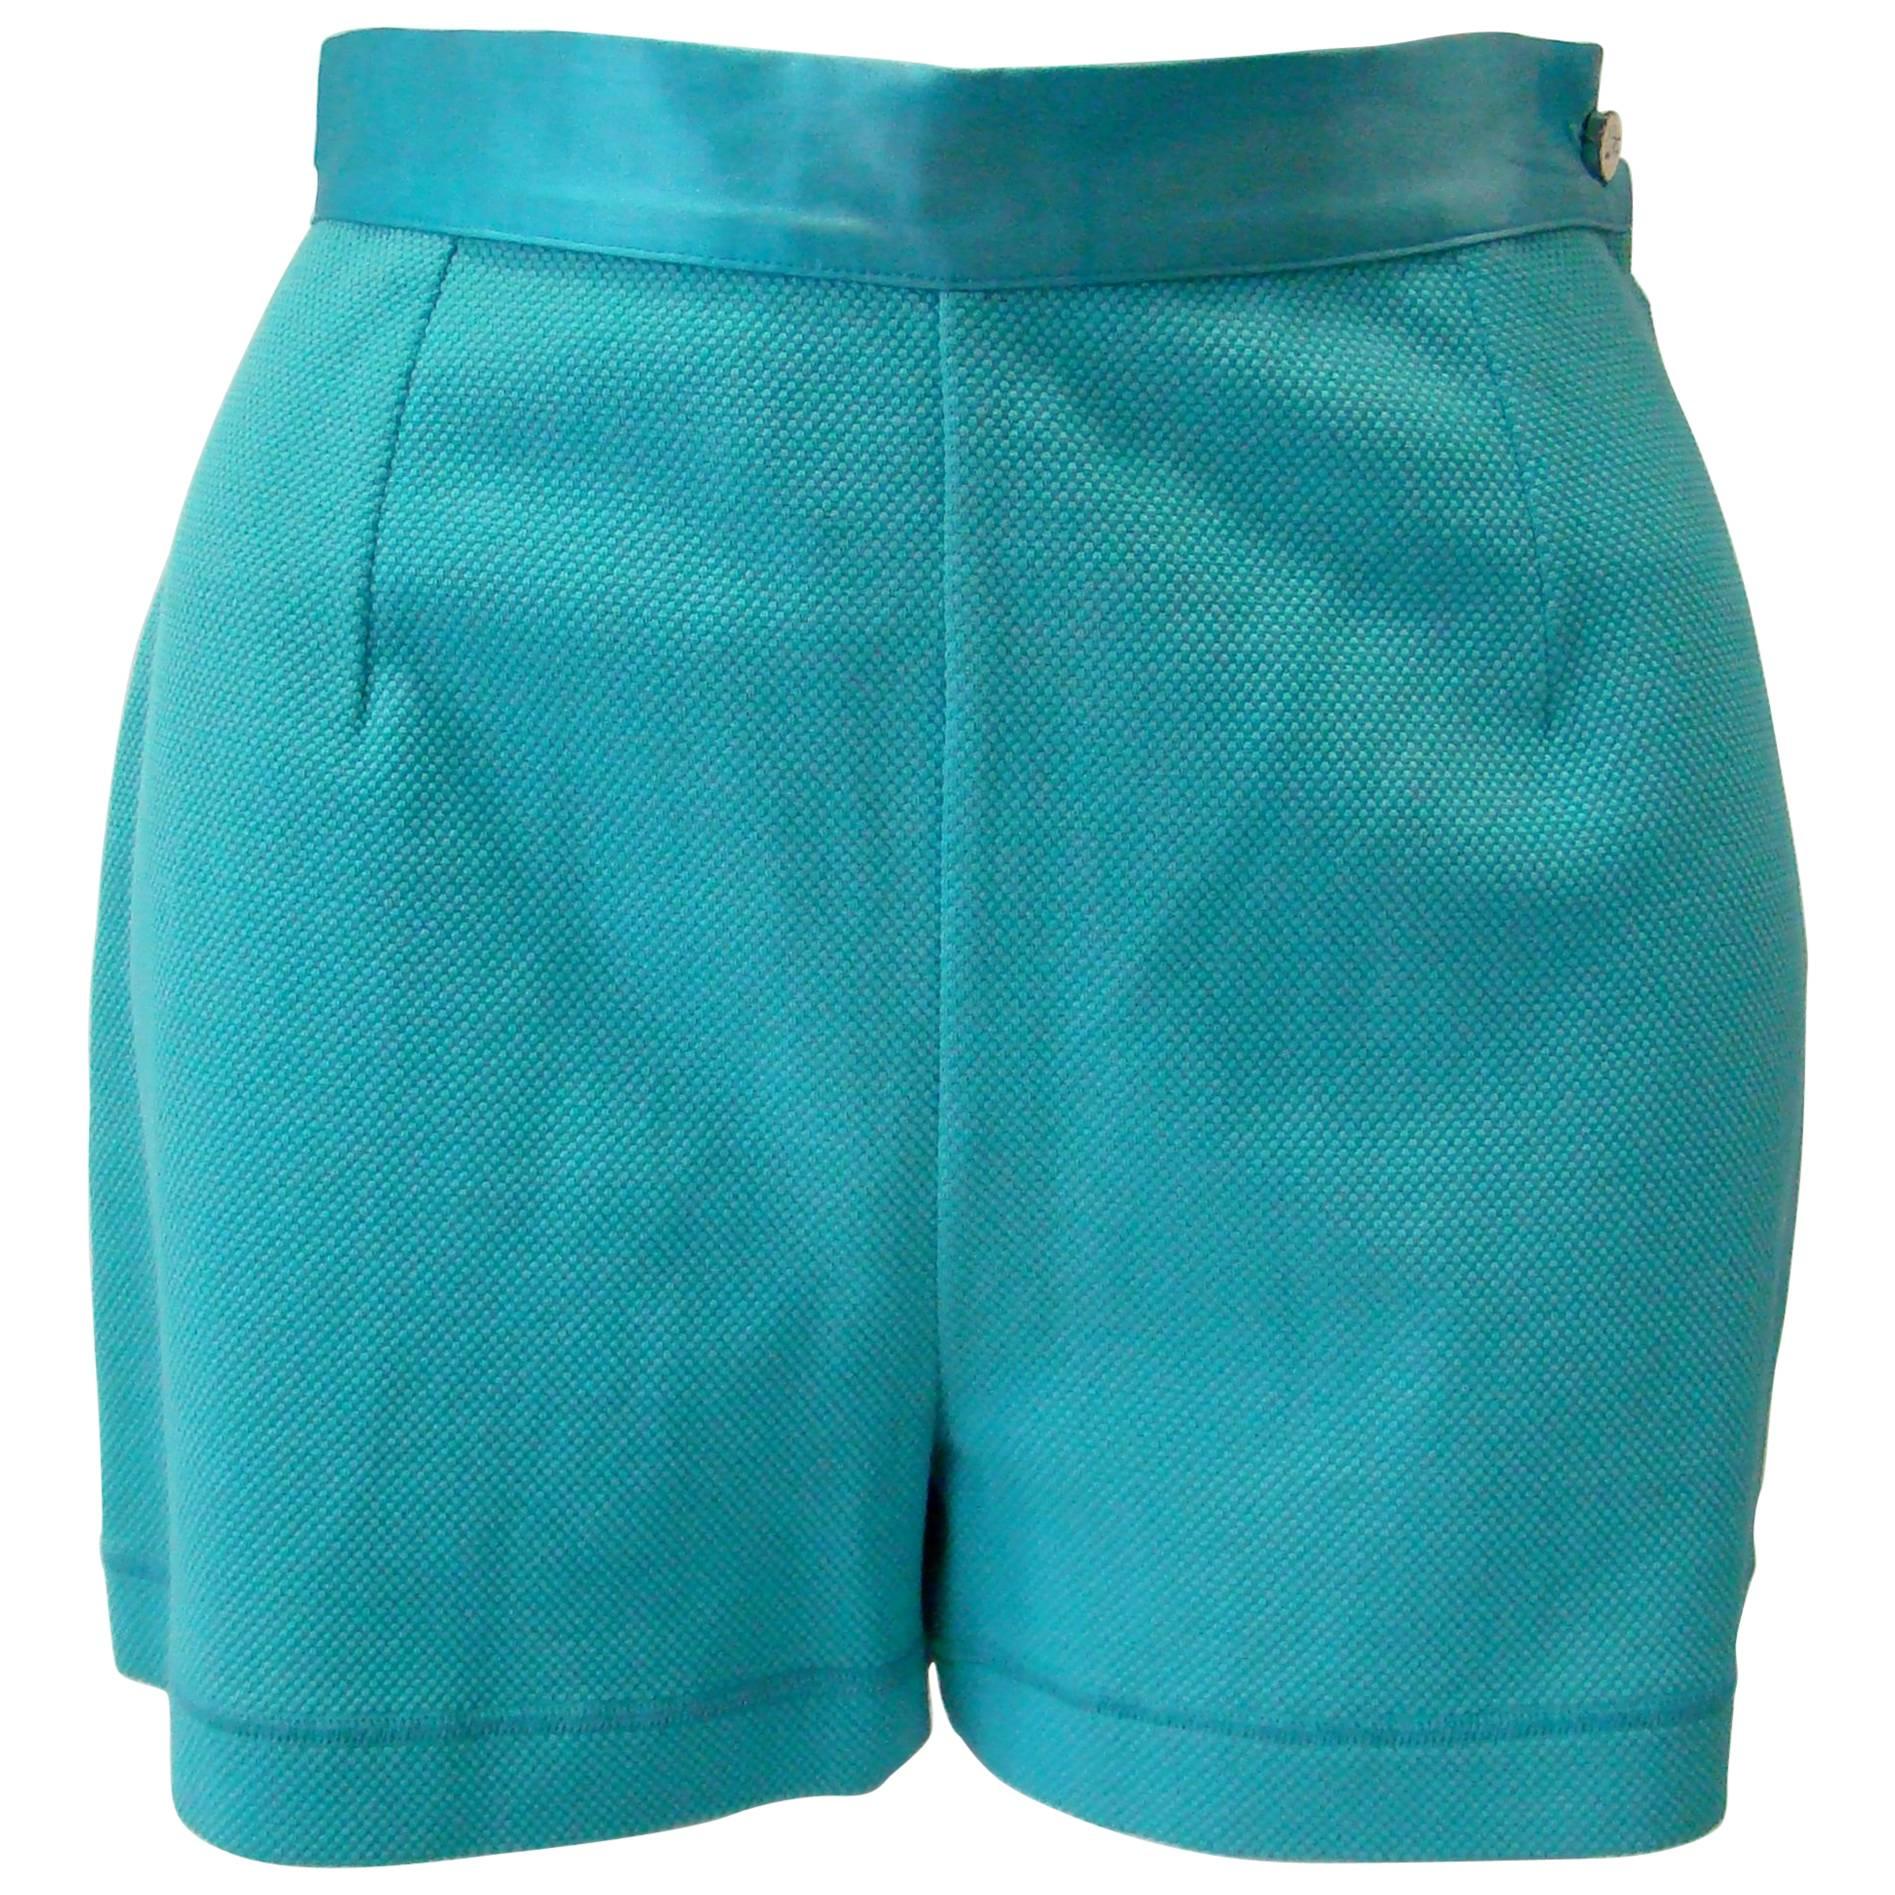 Gianfranco Ferre Turquoise Shorts For Sale